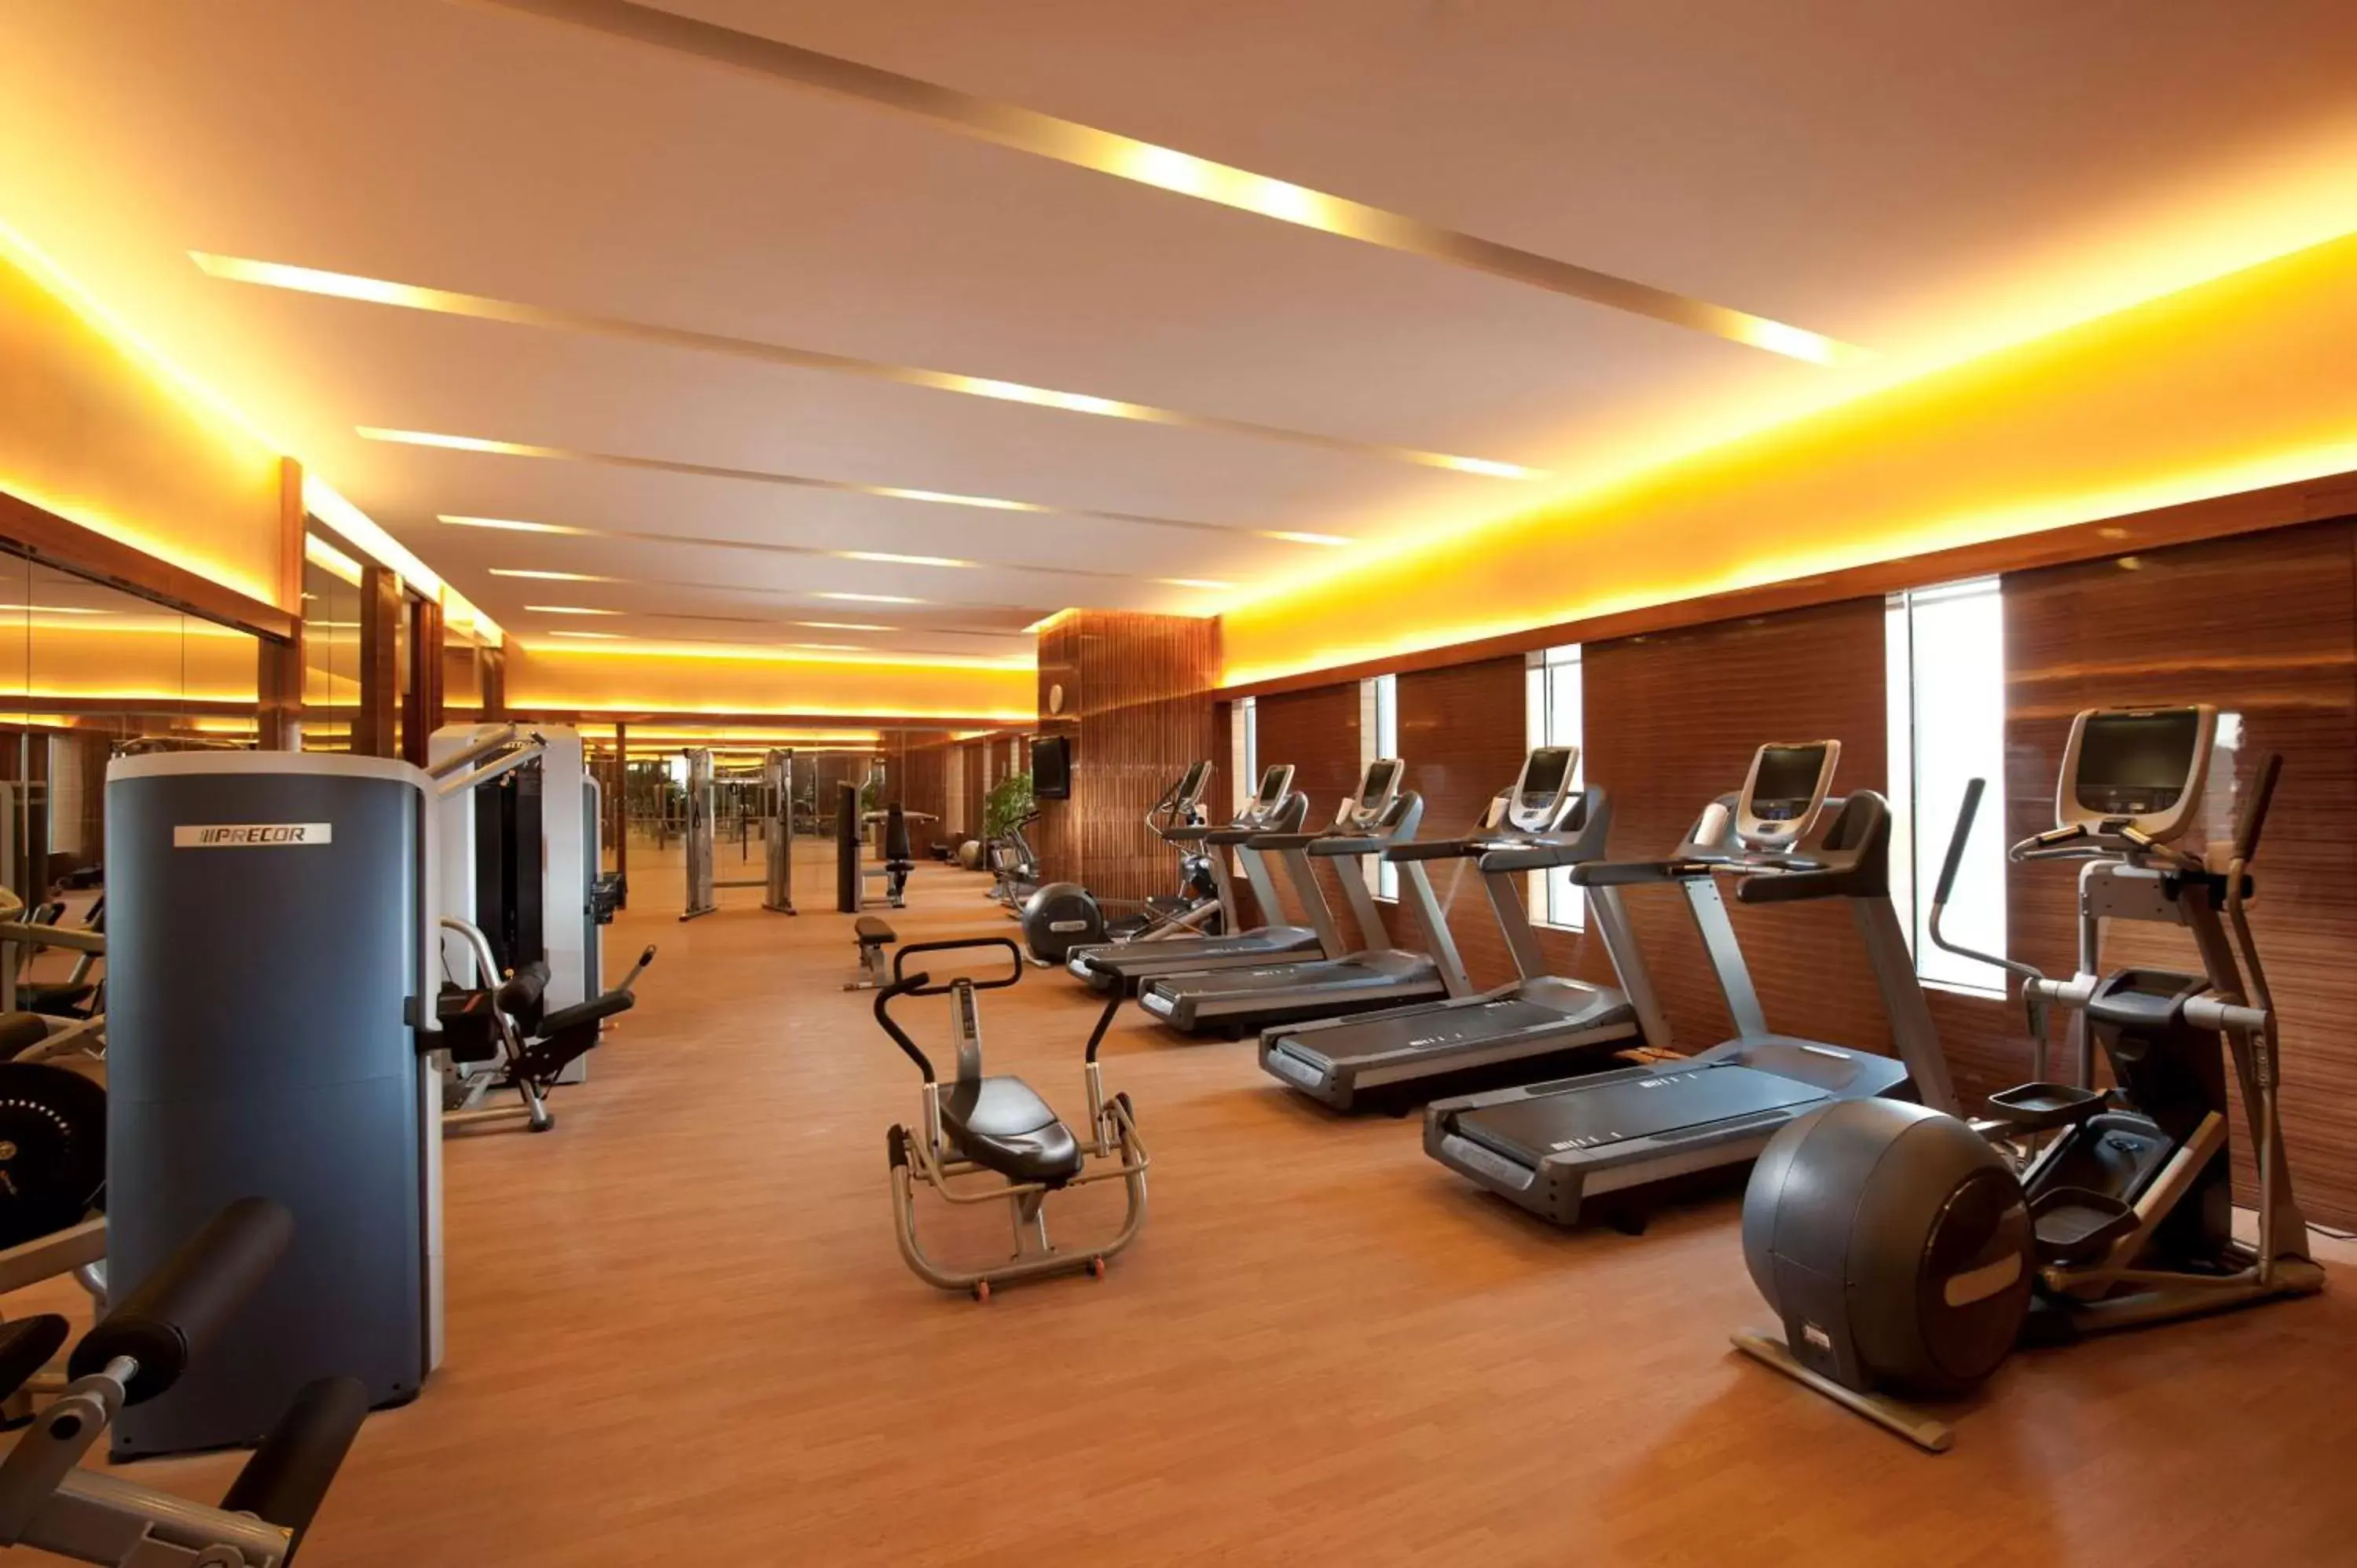 Fitness centre/facilities, Fitness Center/Facilities in Hilton Nanjing